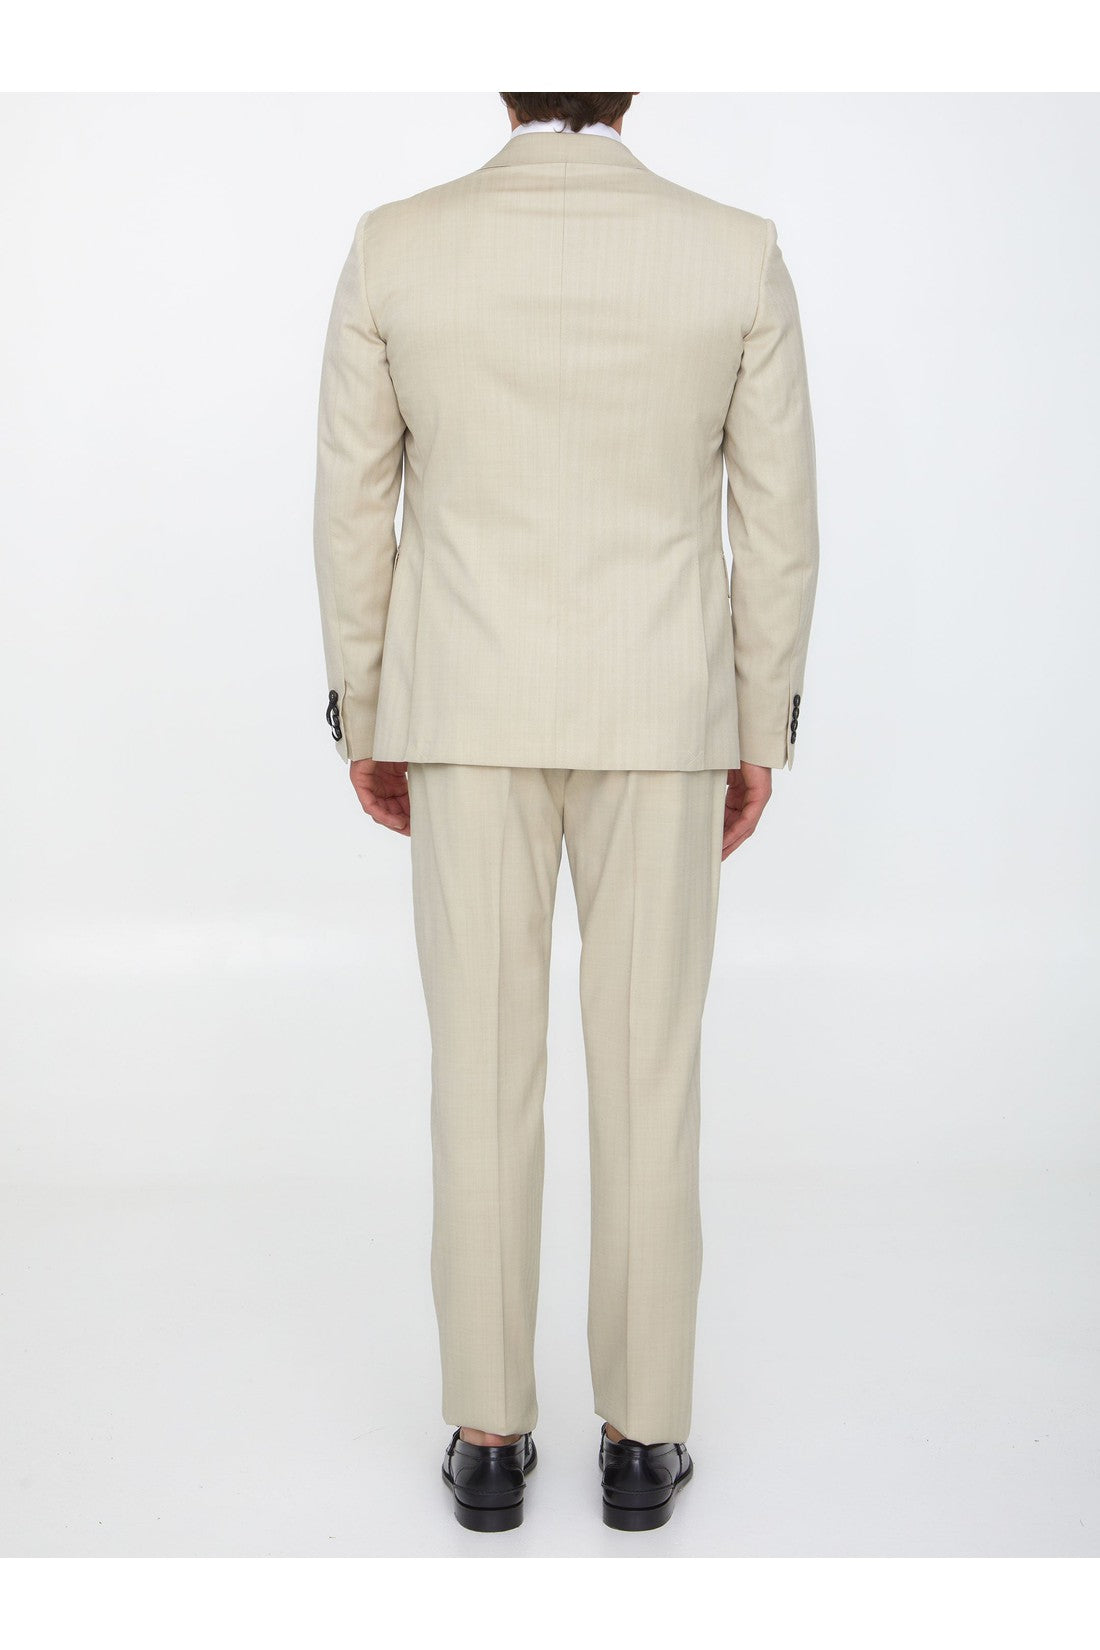 Sand-colored wool two-piece suit